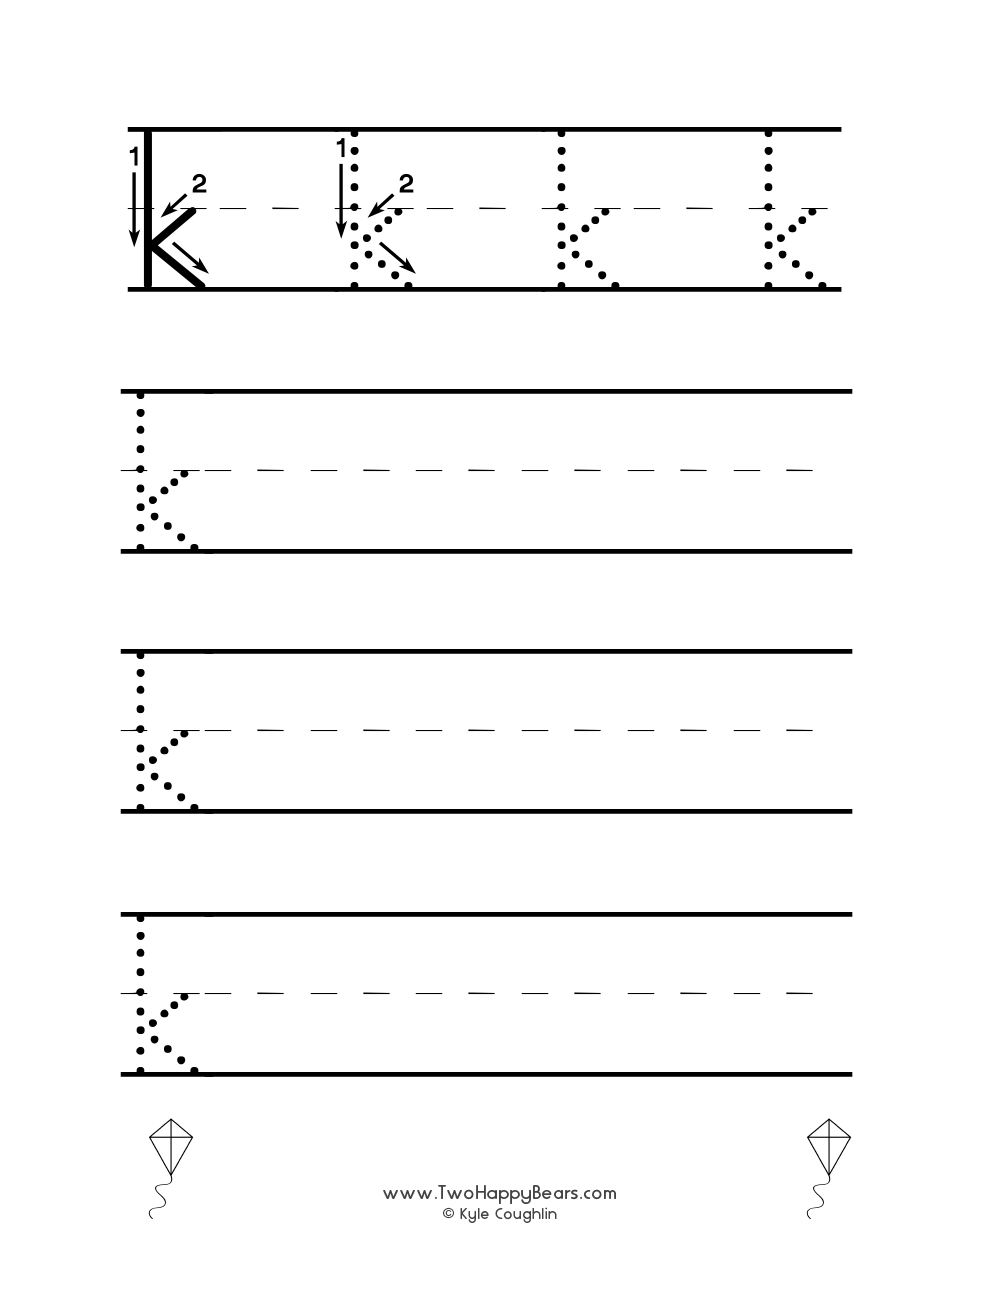 Worksheet for tracing and writing the lowercase letter K, in free printable PDF format.